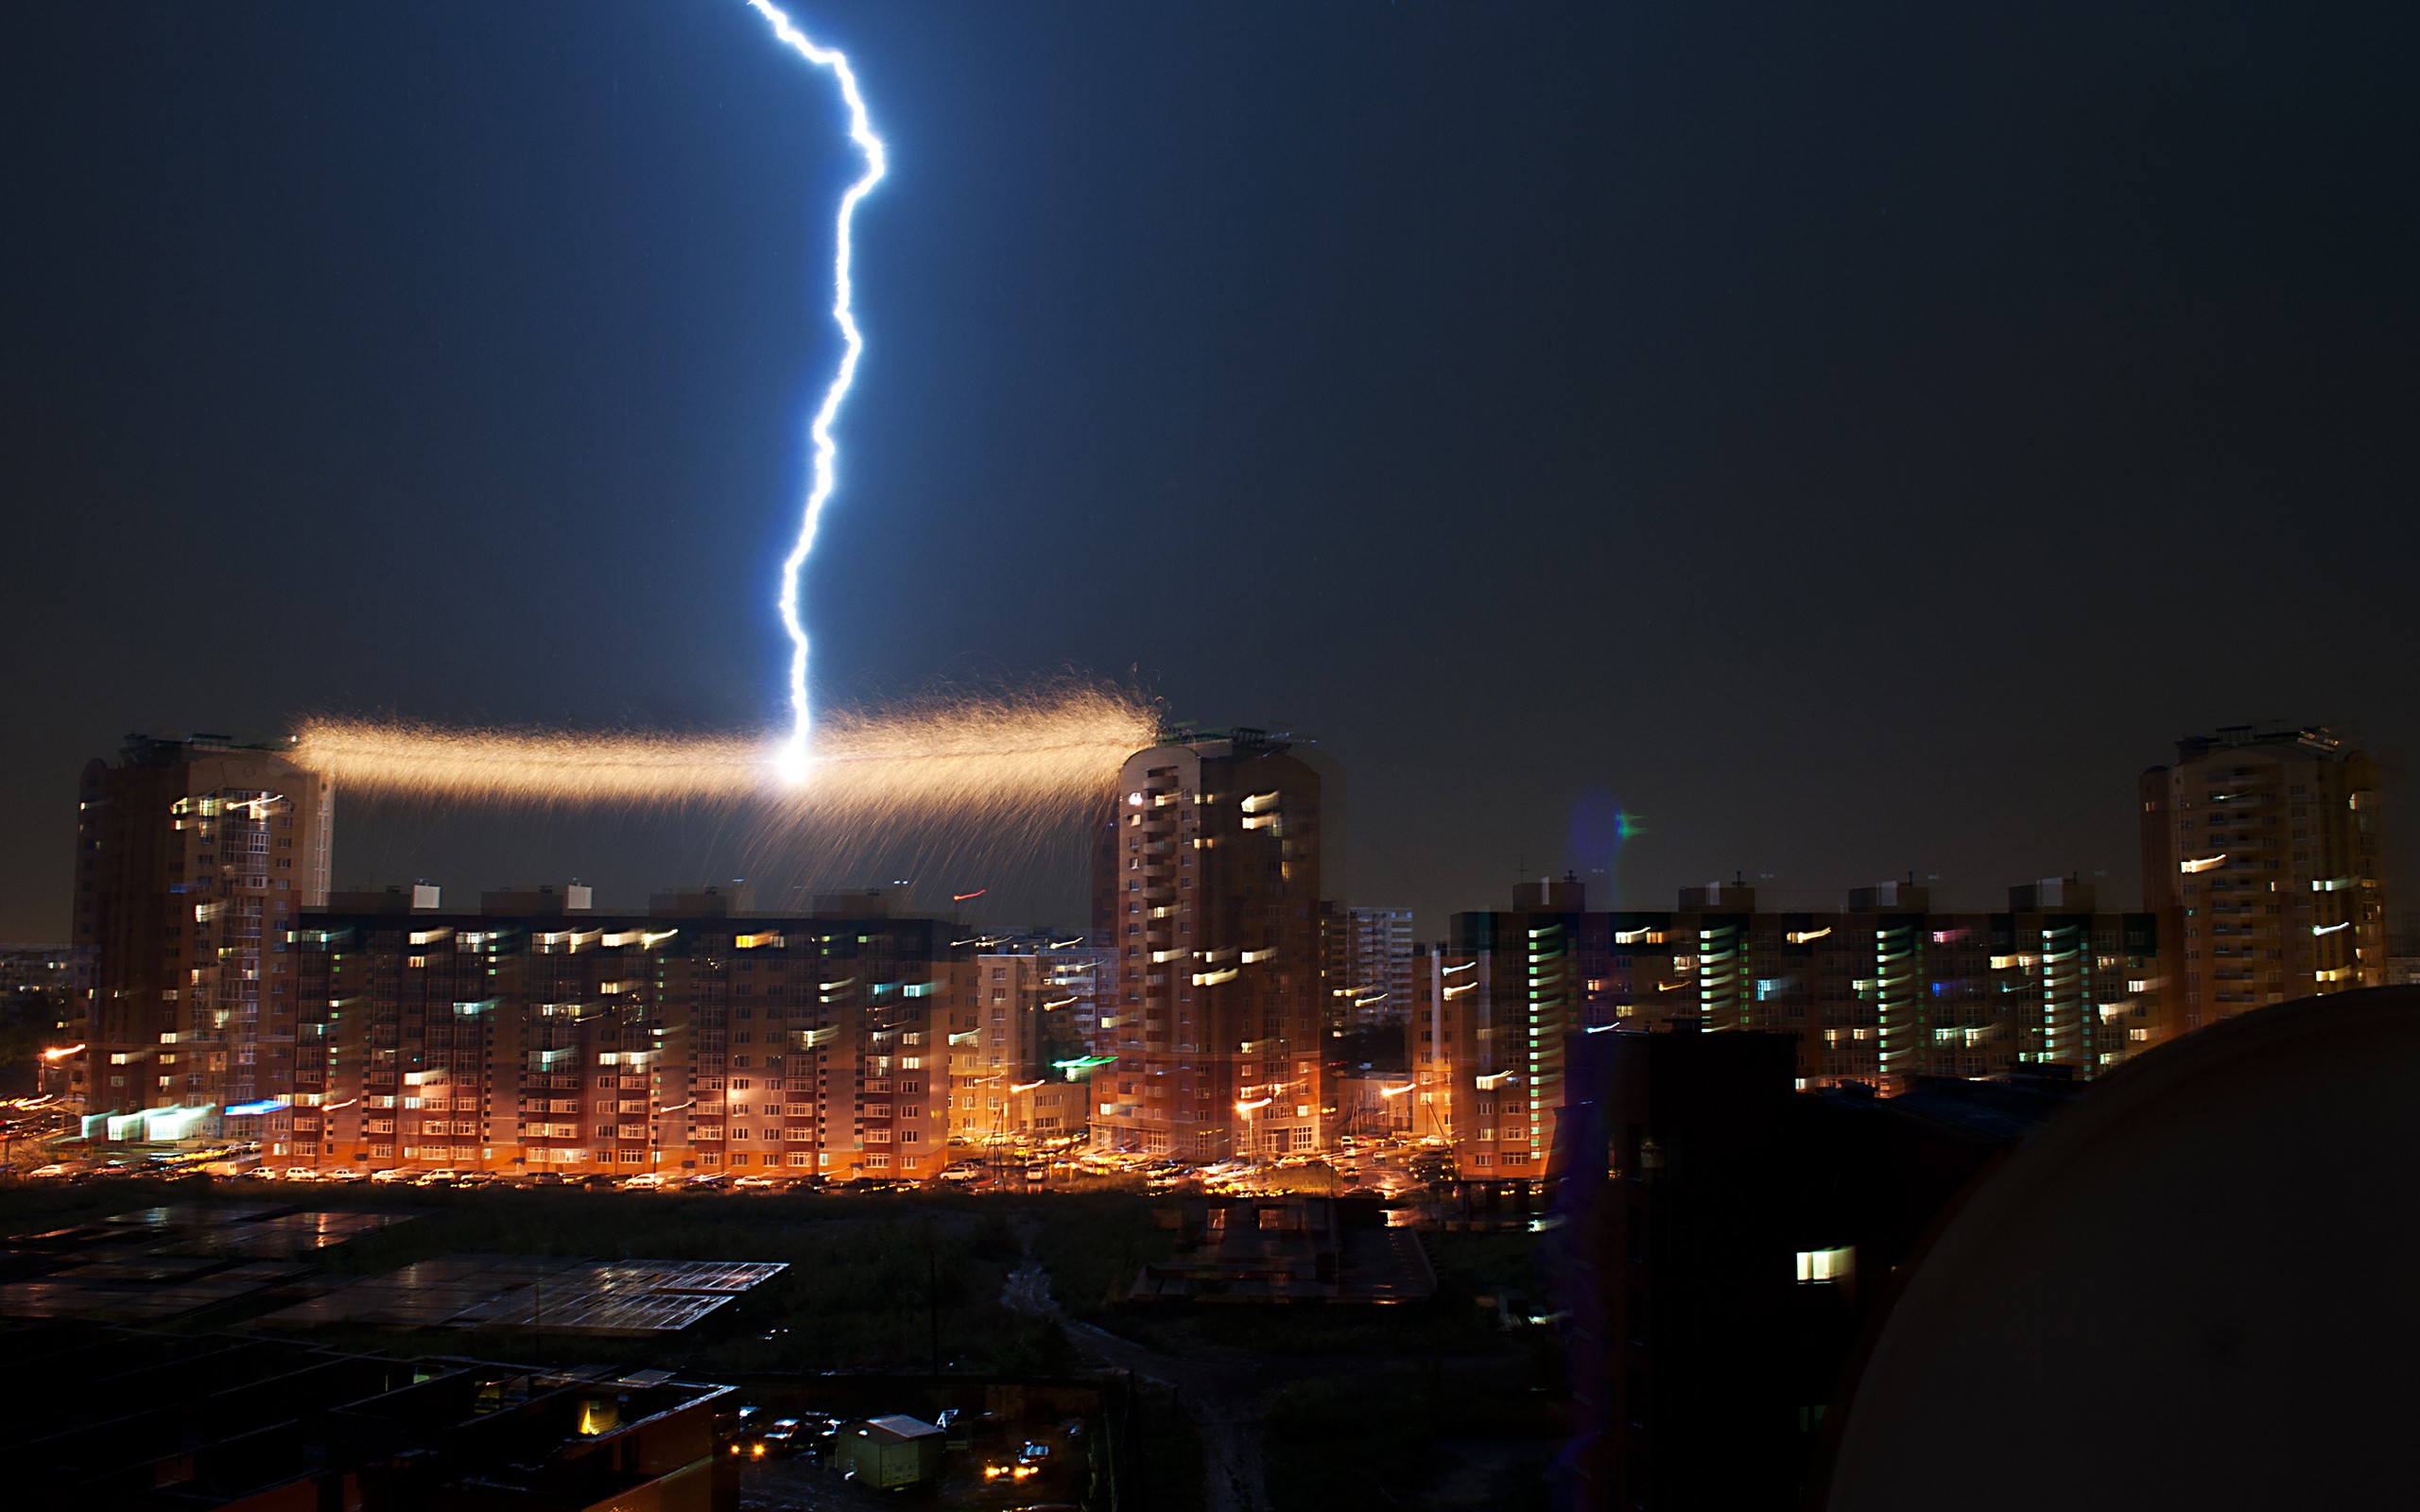 General 2560x1600 lightning cityscape electricity building wires sparks city lights storm sky night